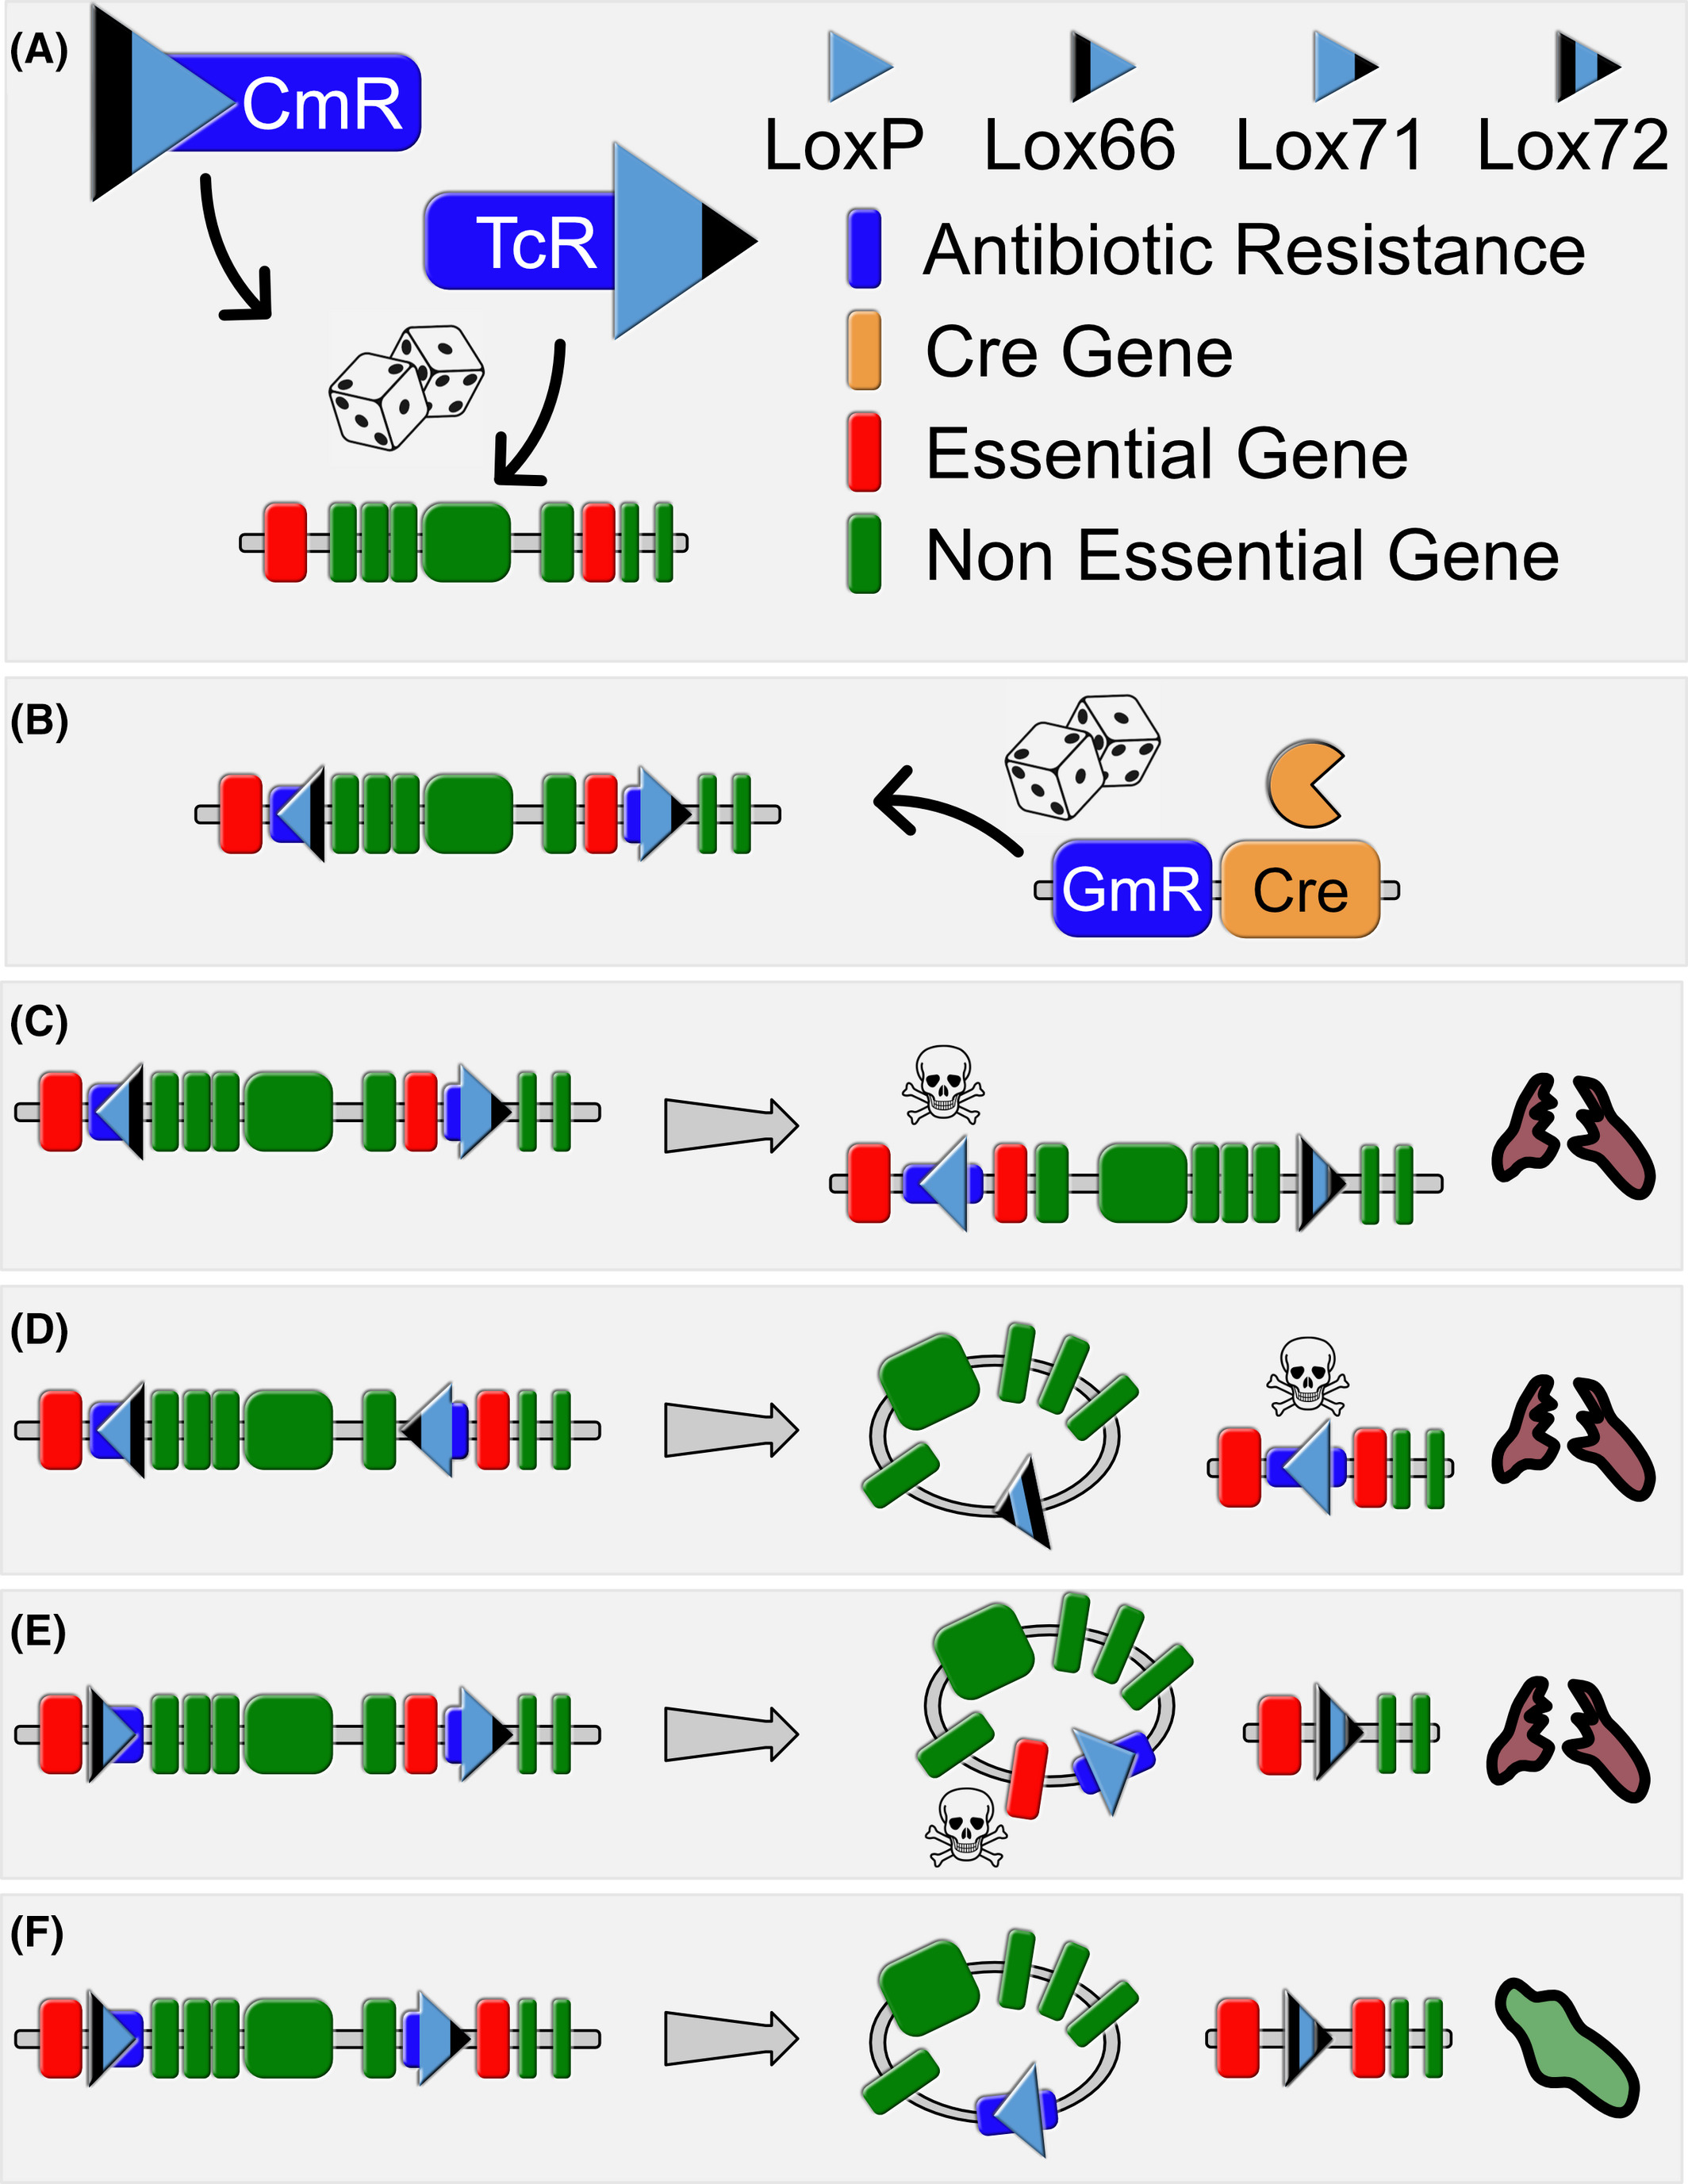 LoxTnSeq: random transposon insertions combined with cre/lox recombination and counterselection to generate large random genome reductions